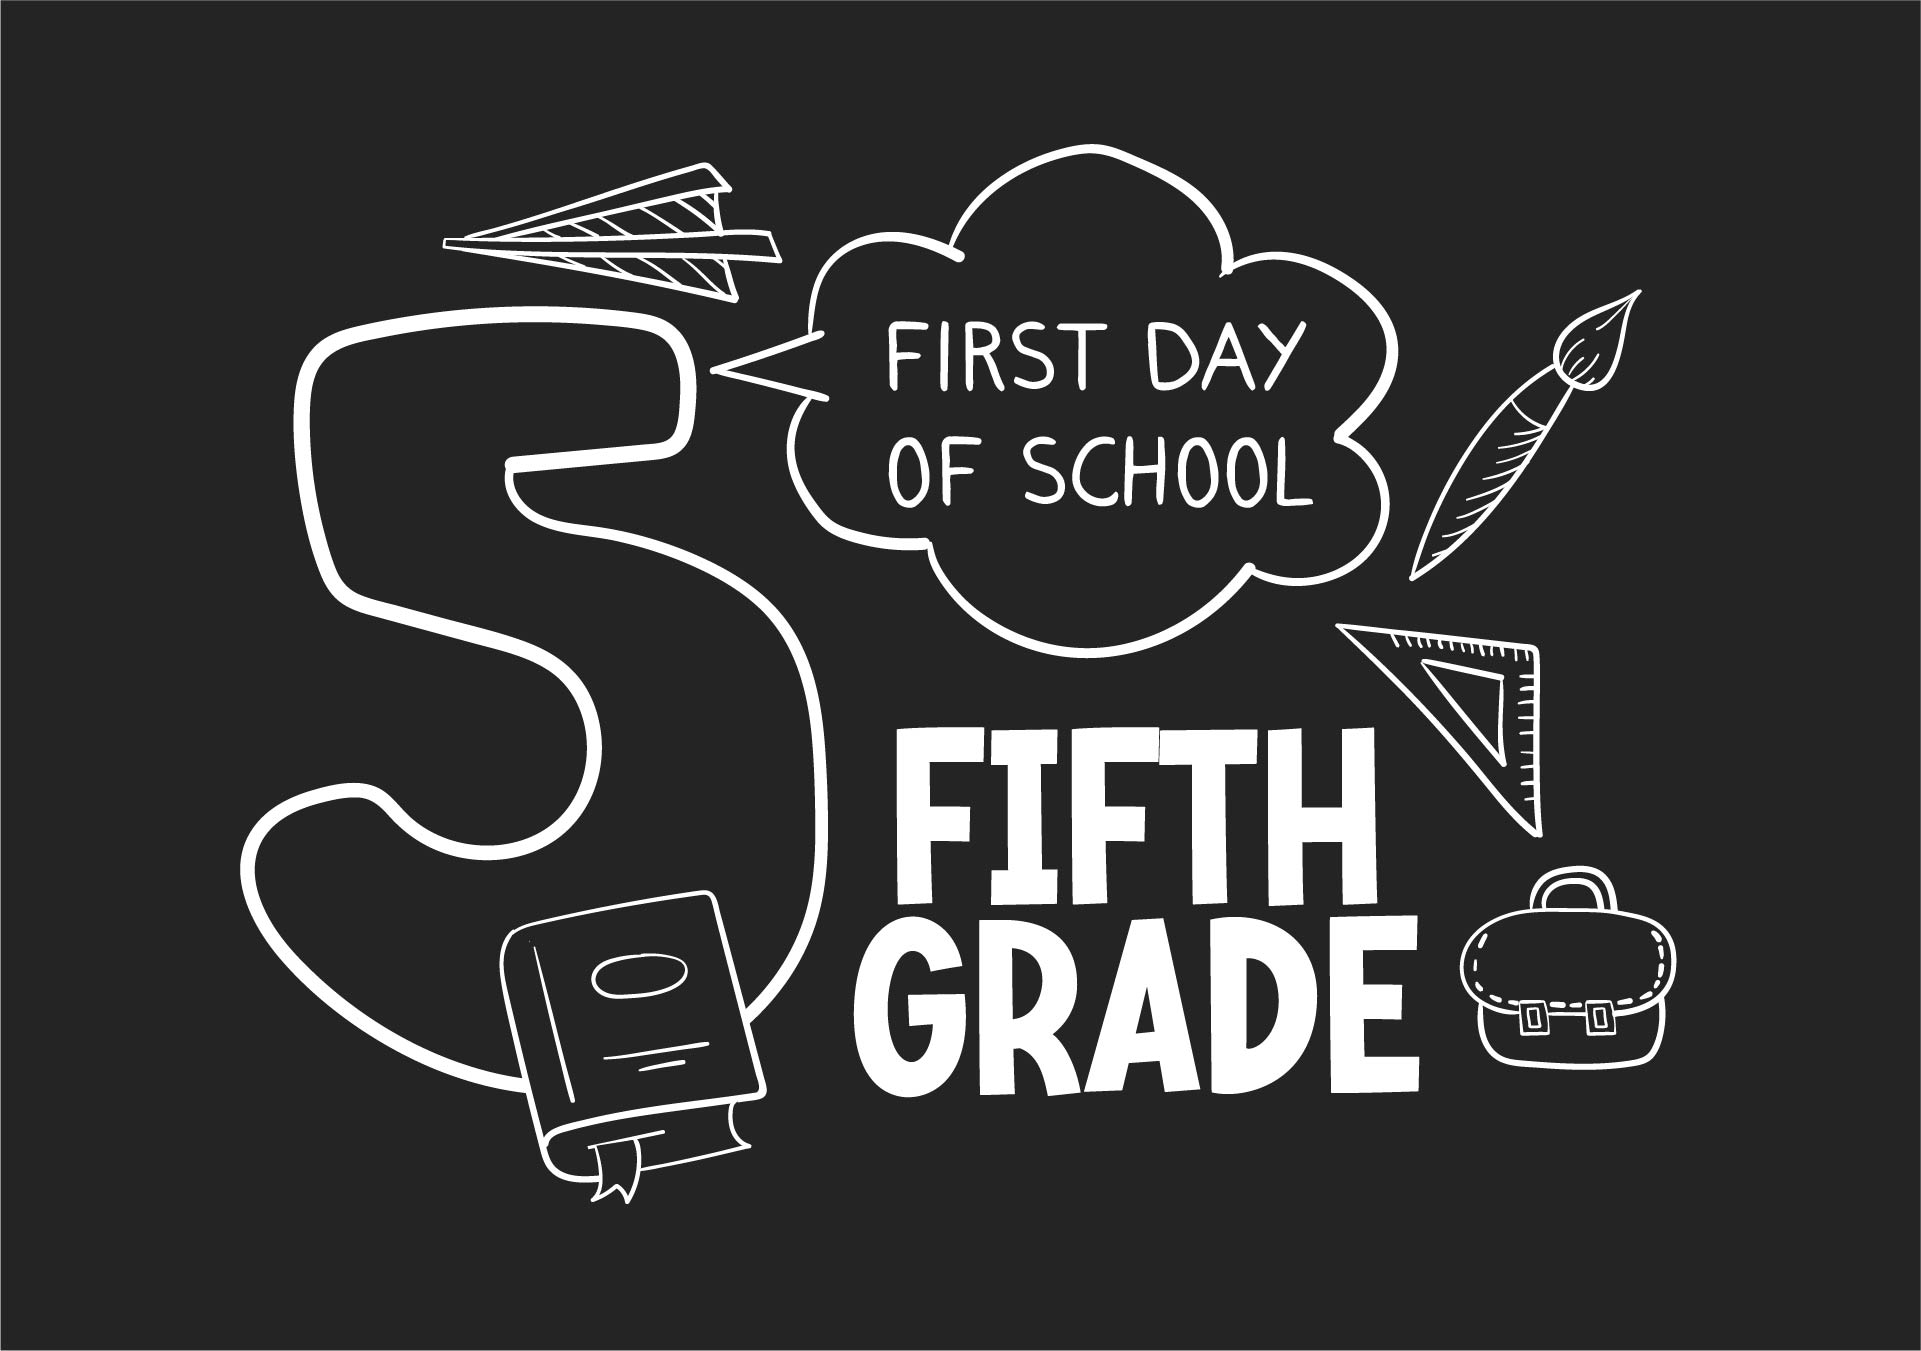 5th Grade First Day of School Chalkboard Sign